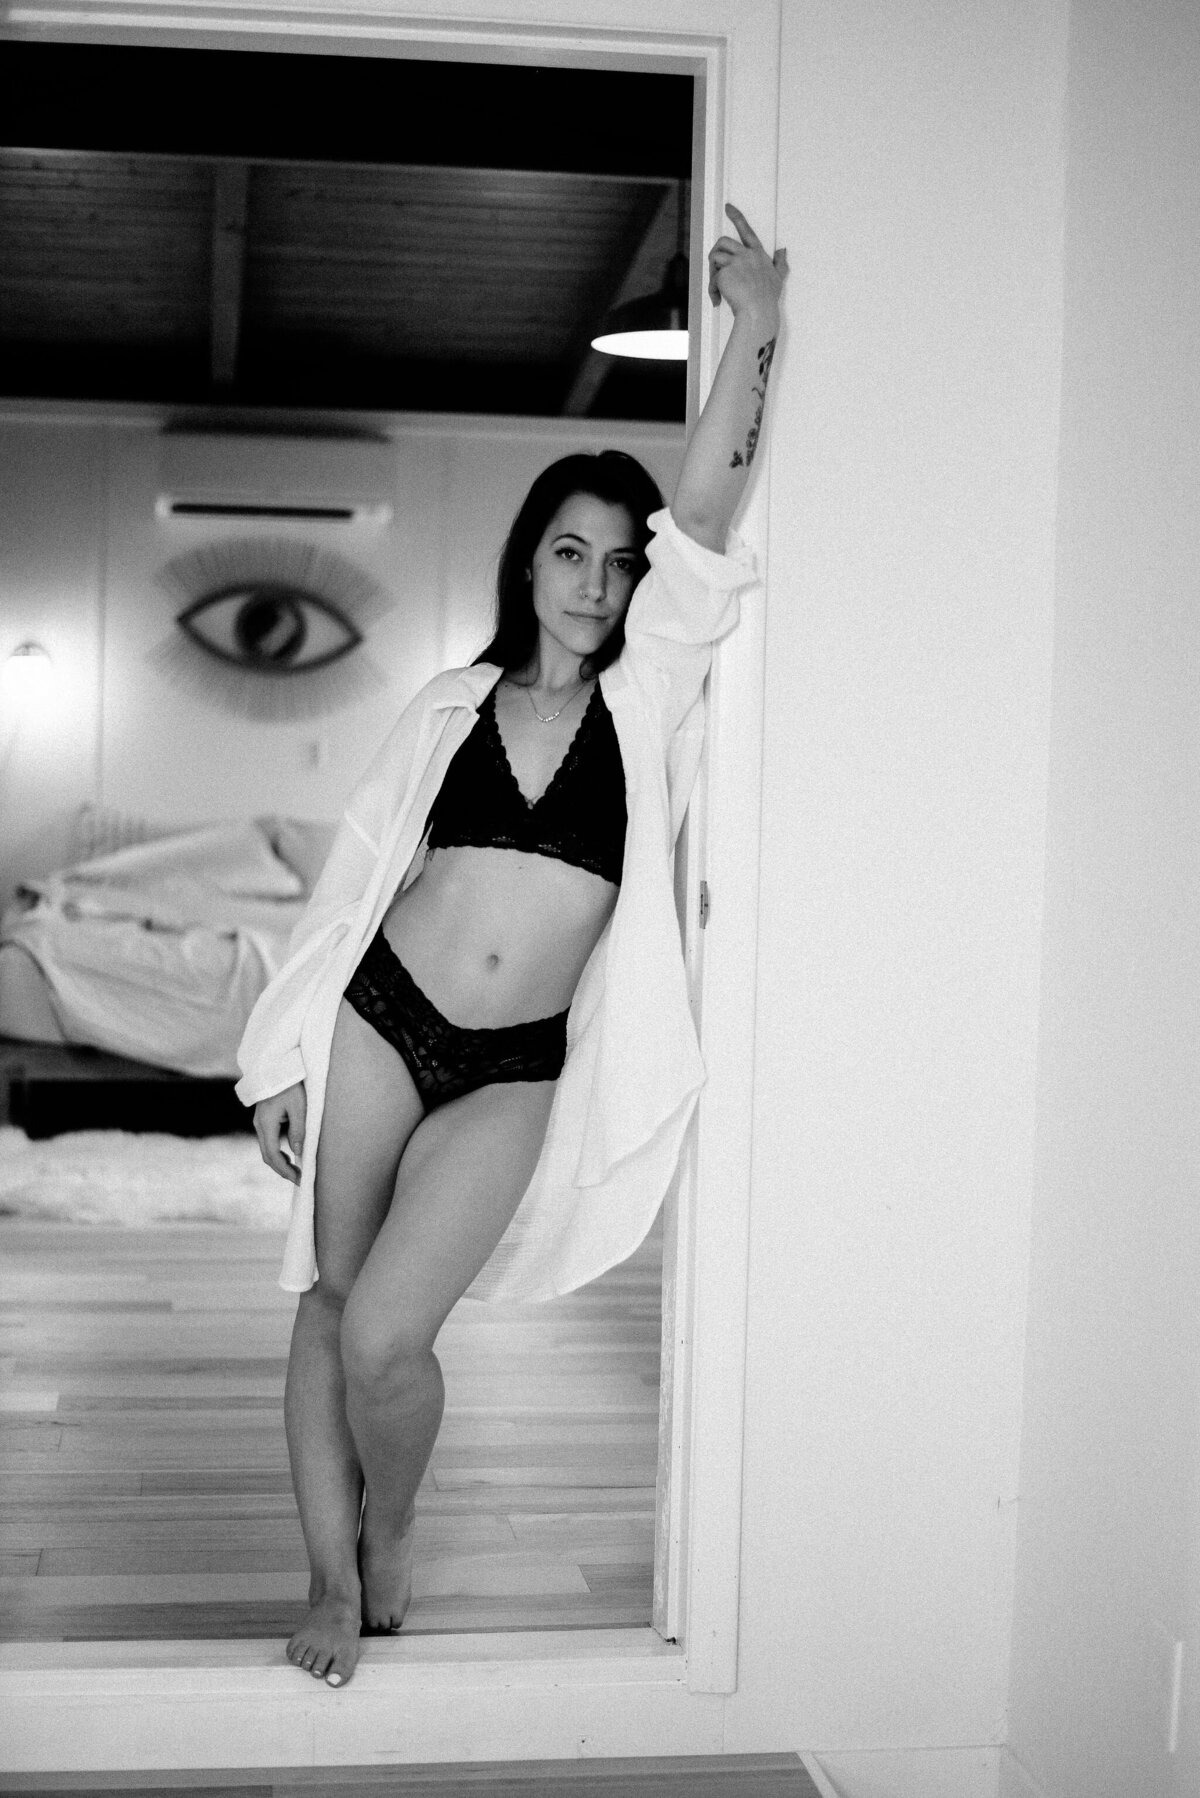 Woman in lingerie and oversized men's white tee leans in doorway.